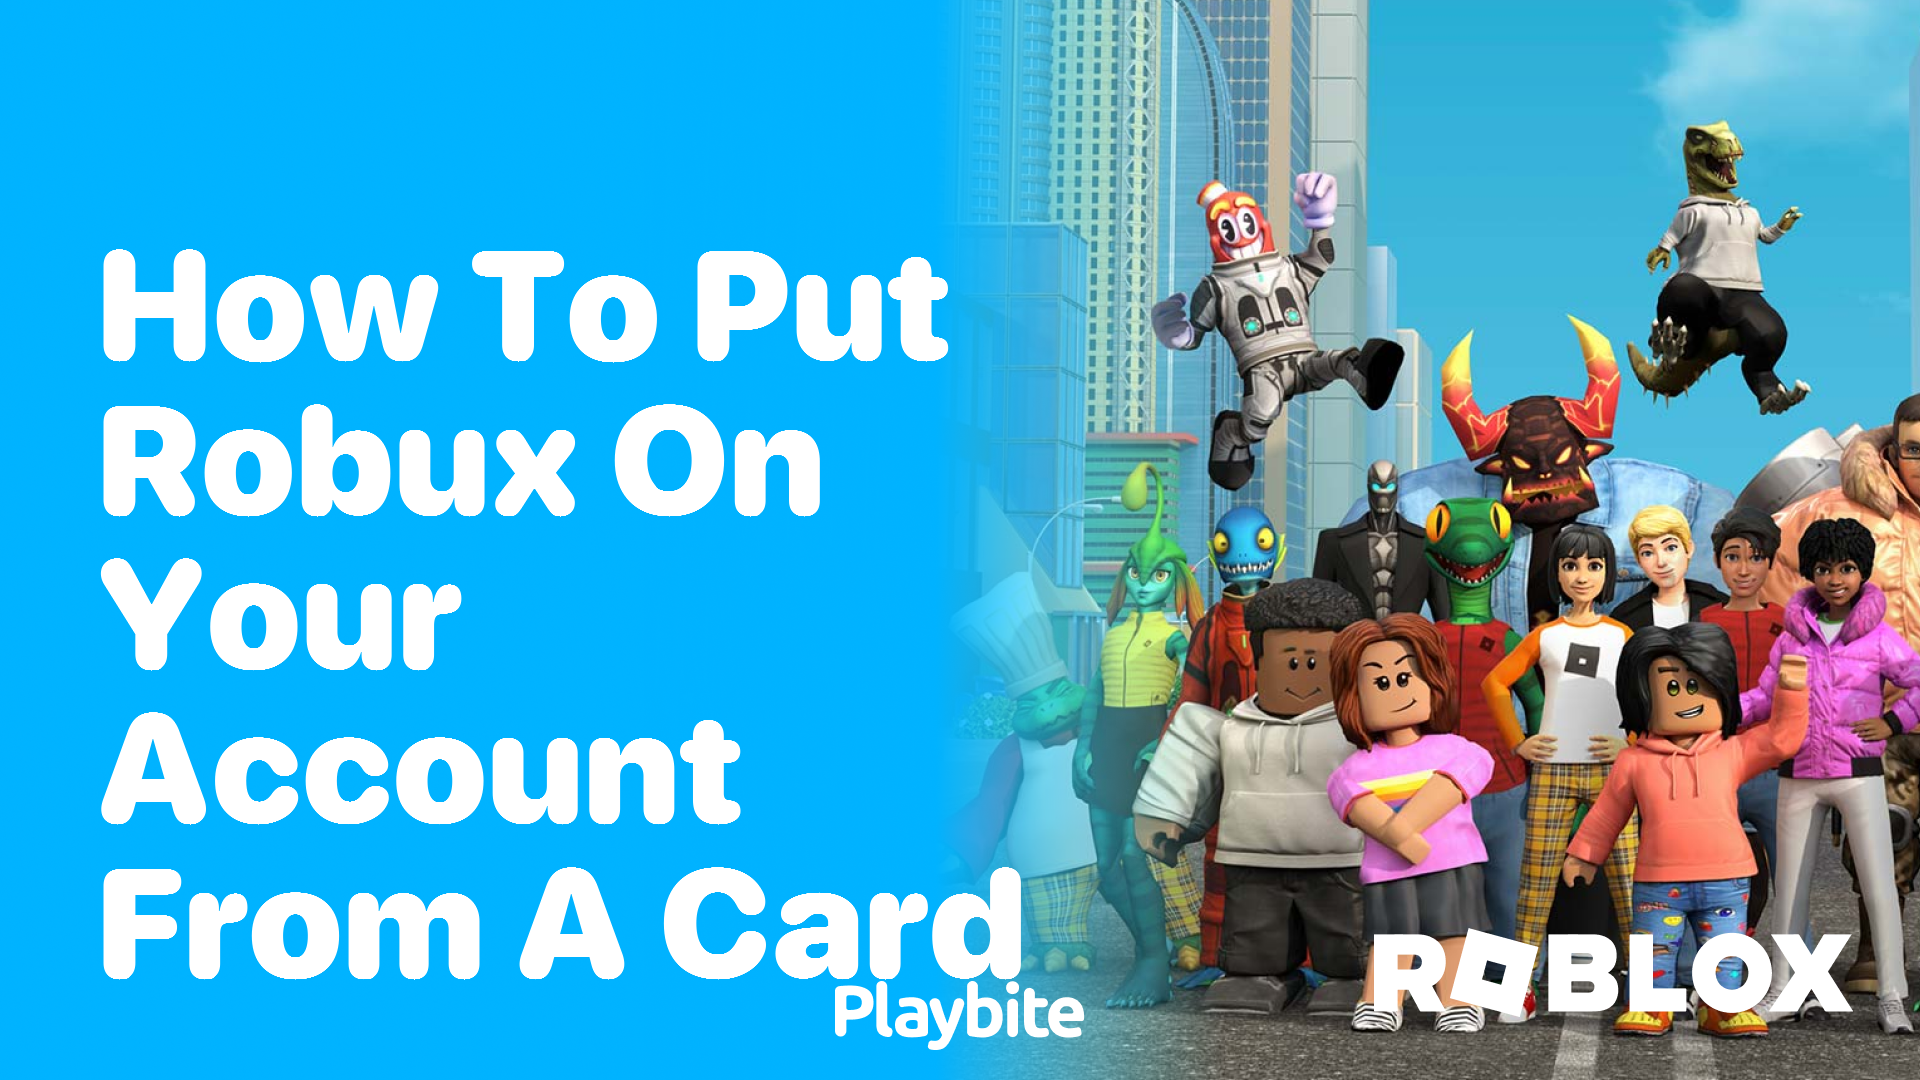 How to Put Robux on Your Account from a Card